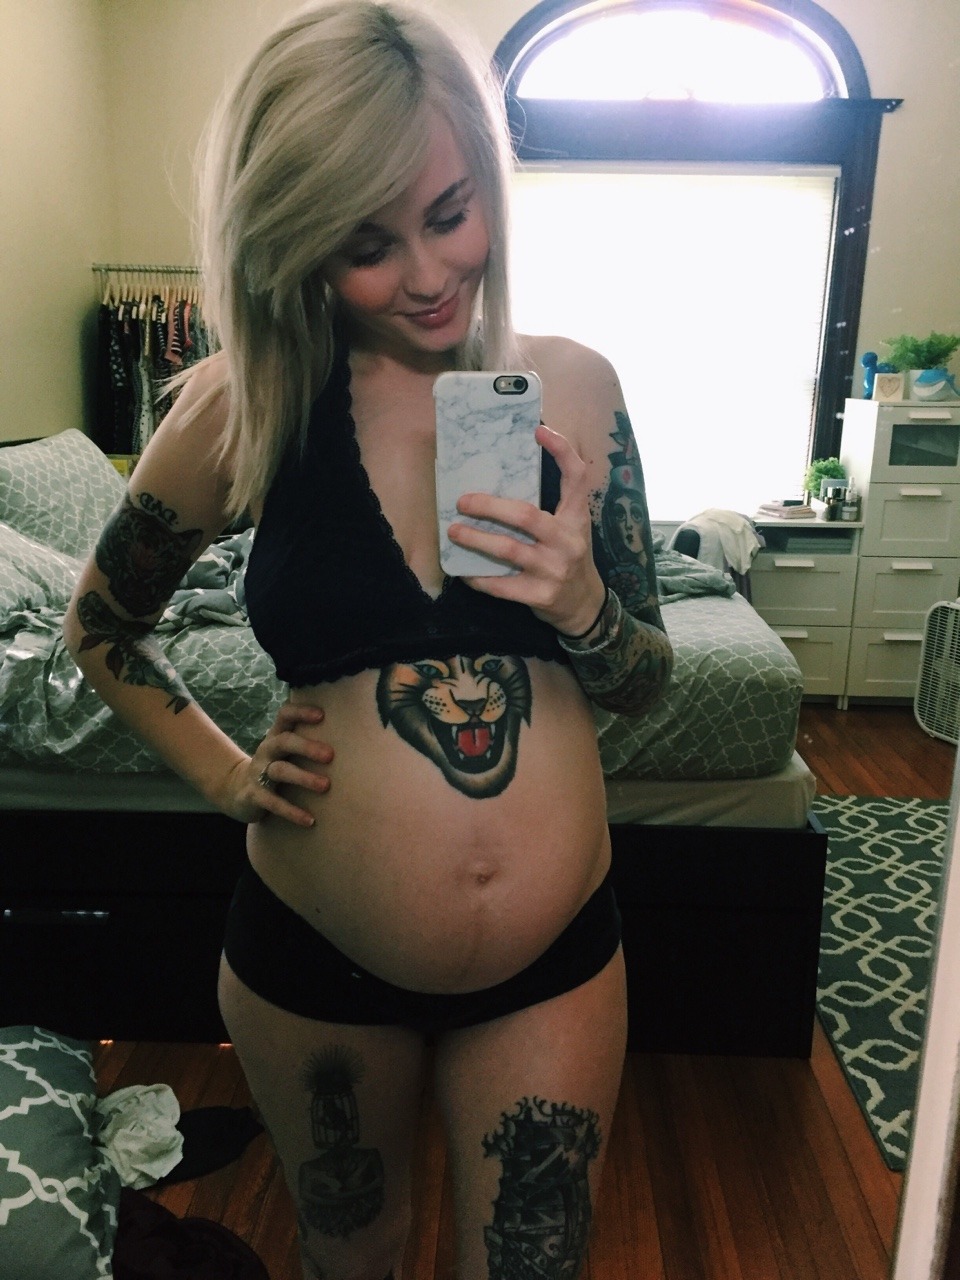 rspnsblprty:Feeling real cute today and loving my bump, which is a rare occasion